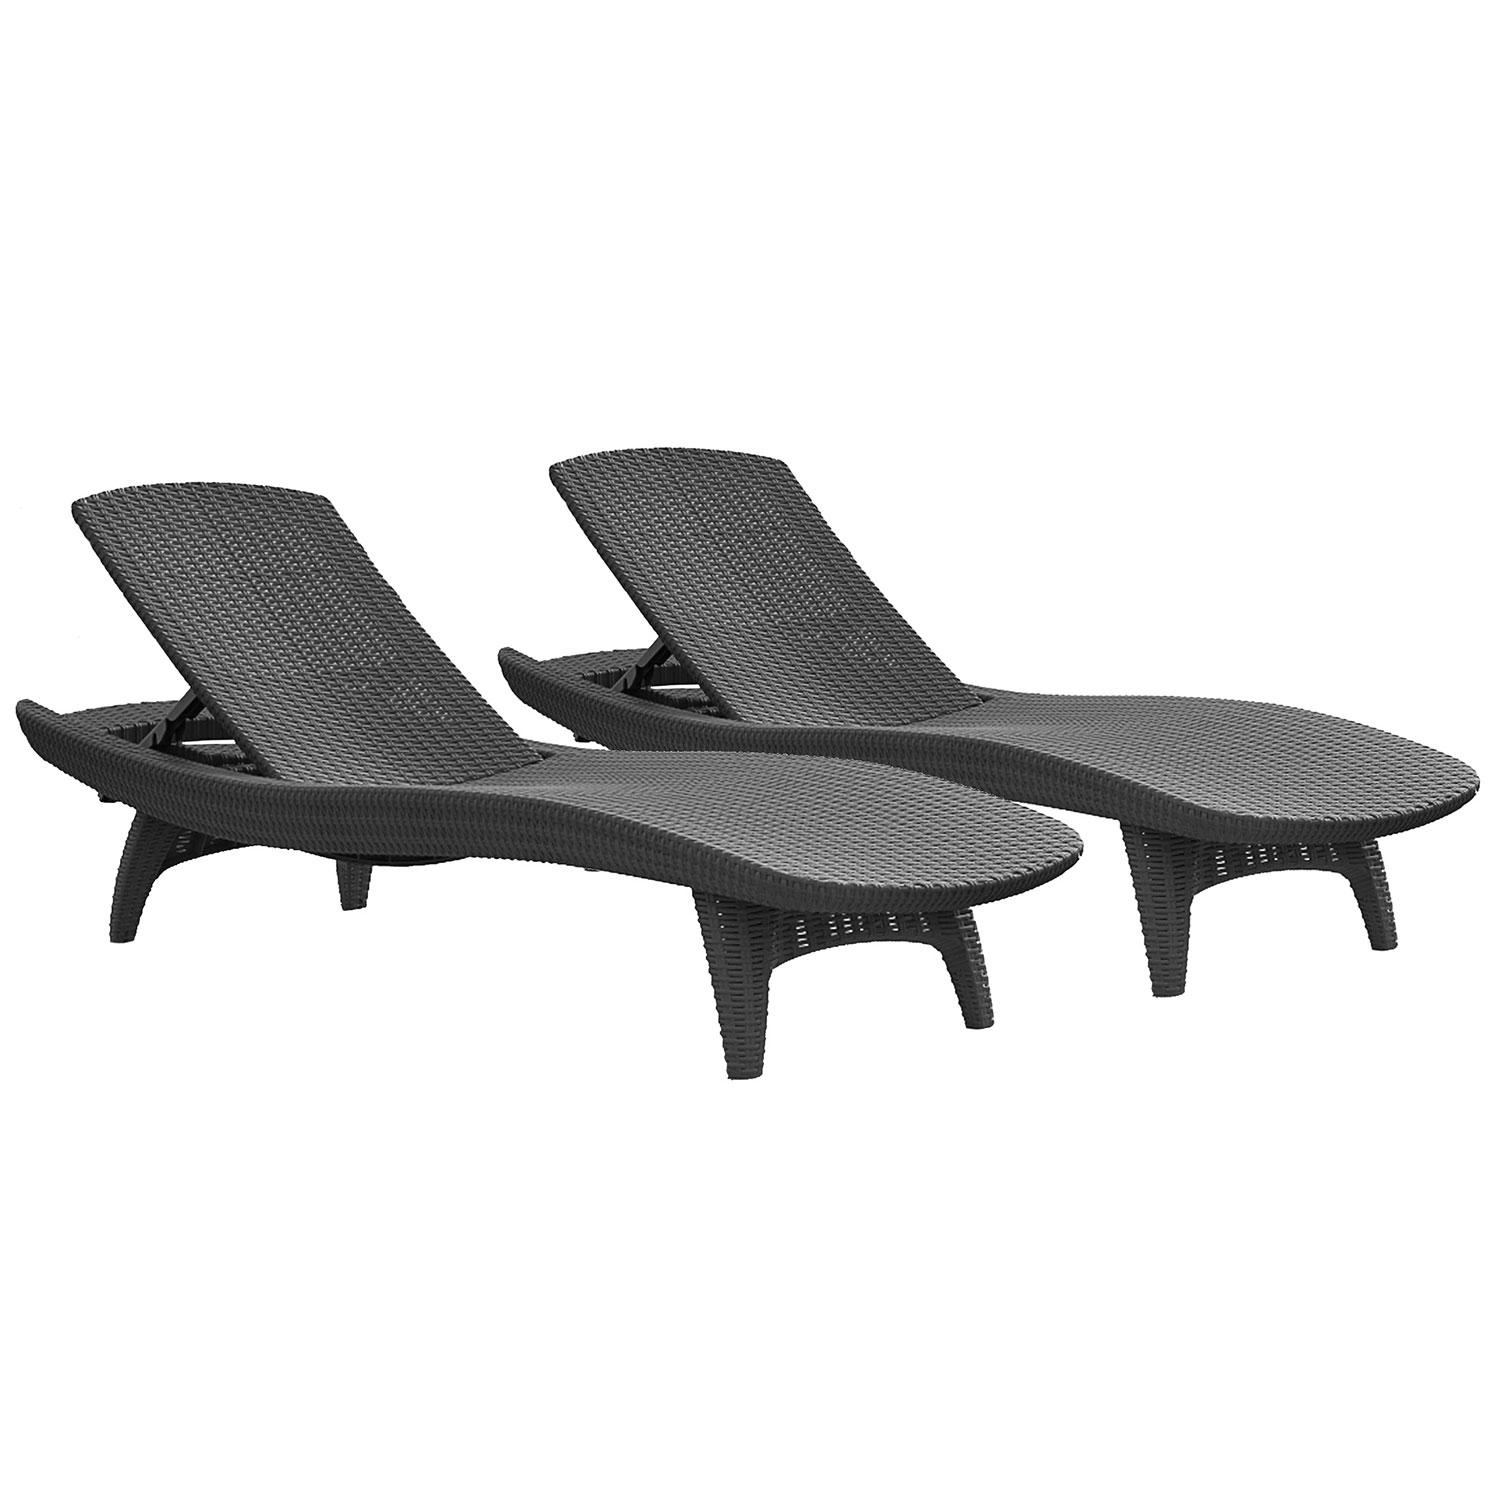 Keter 2-Pack All-weather Grenada Chaise Lounger